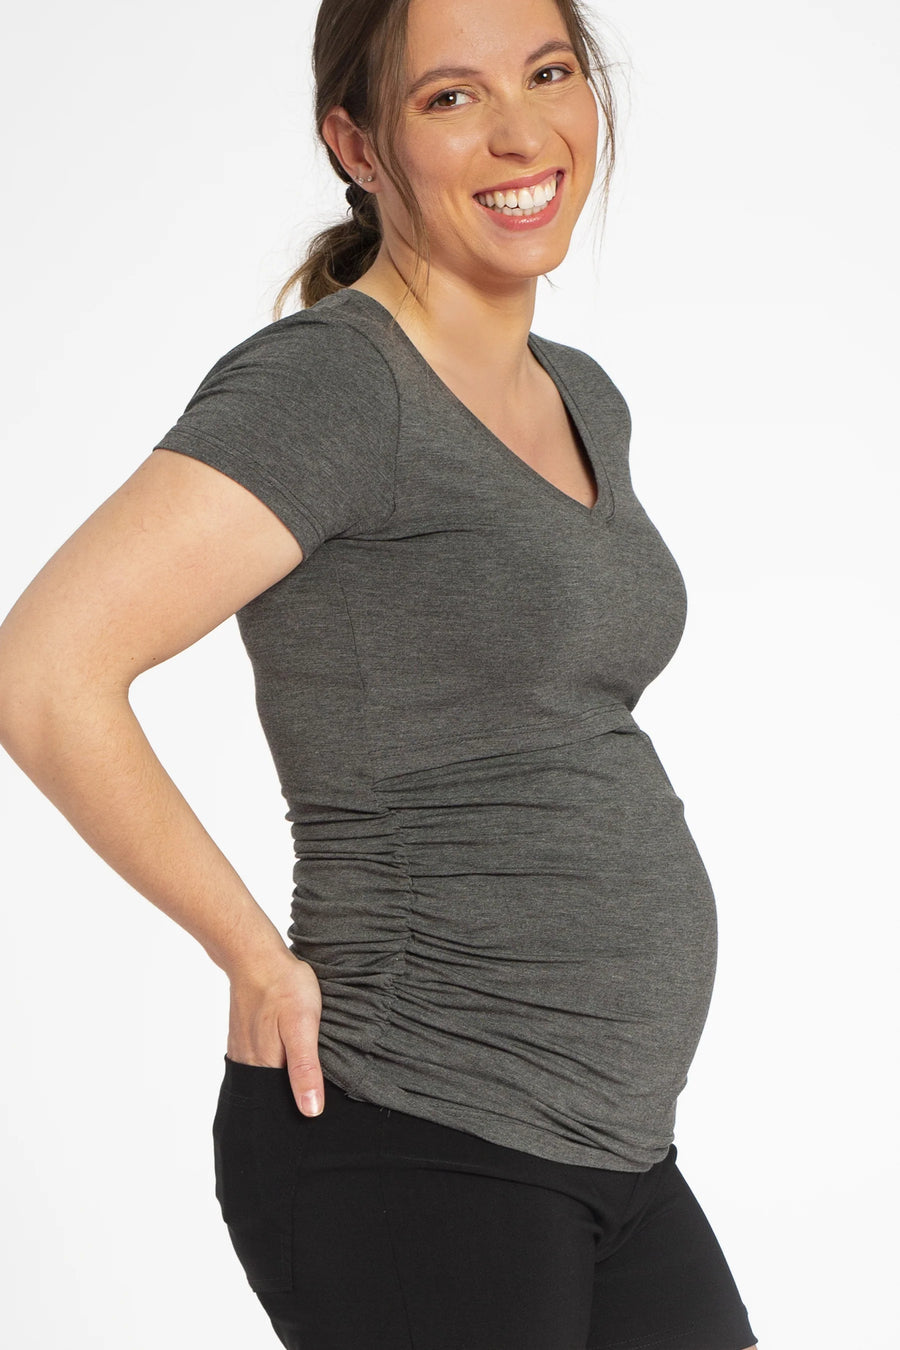 What Size Maternity Clothing Do I Need? Pregnancy Body Type